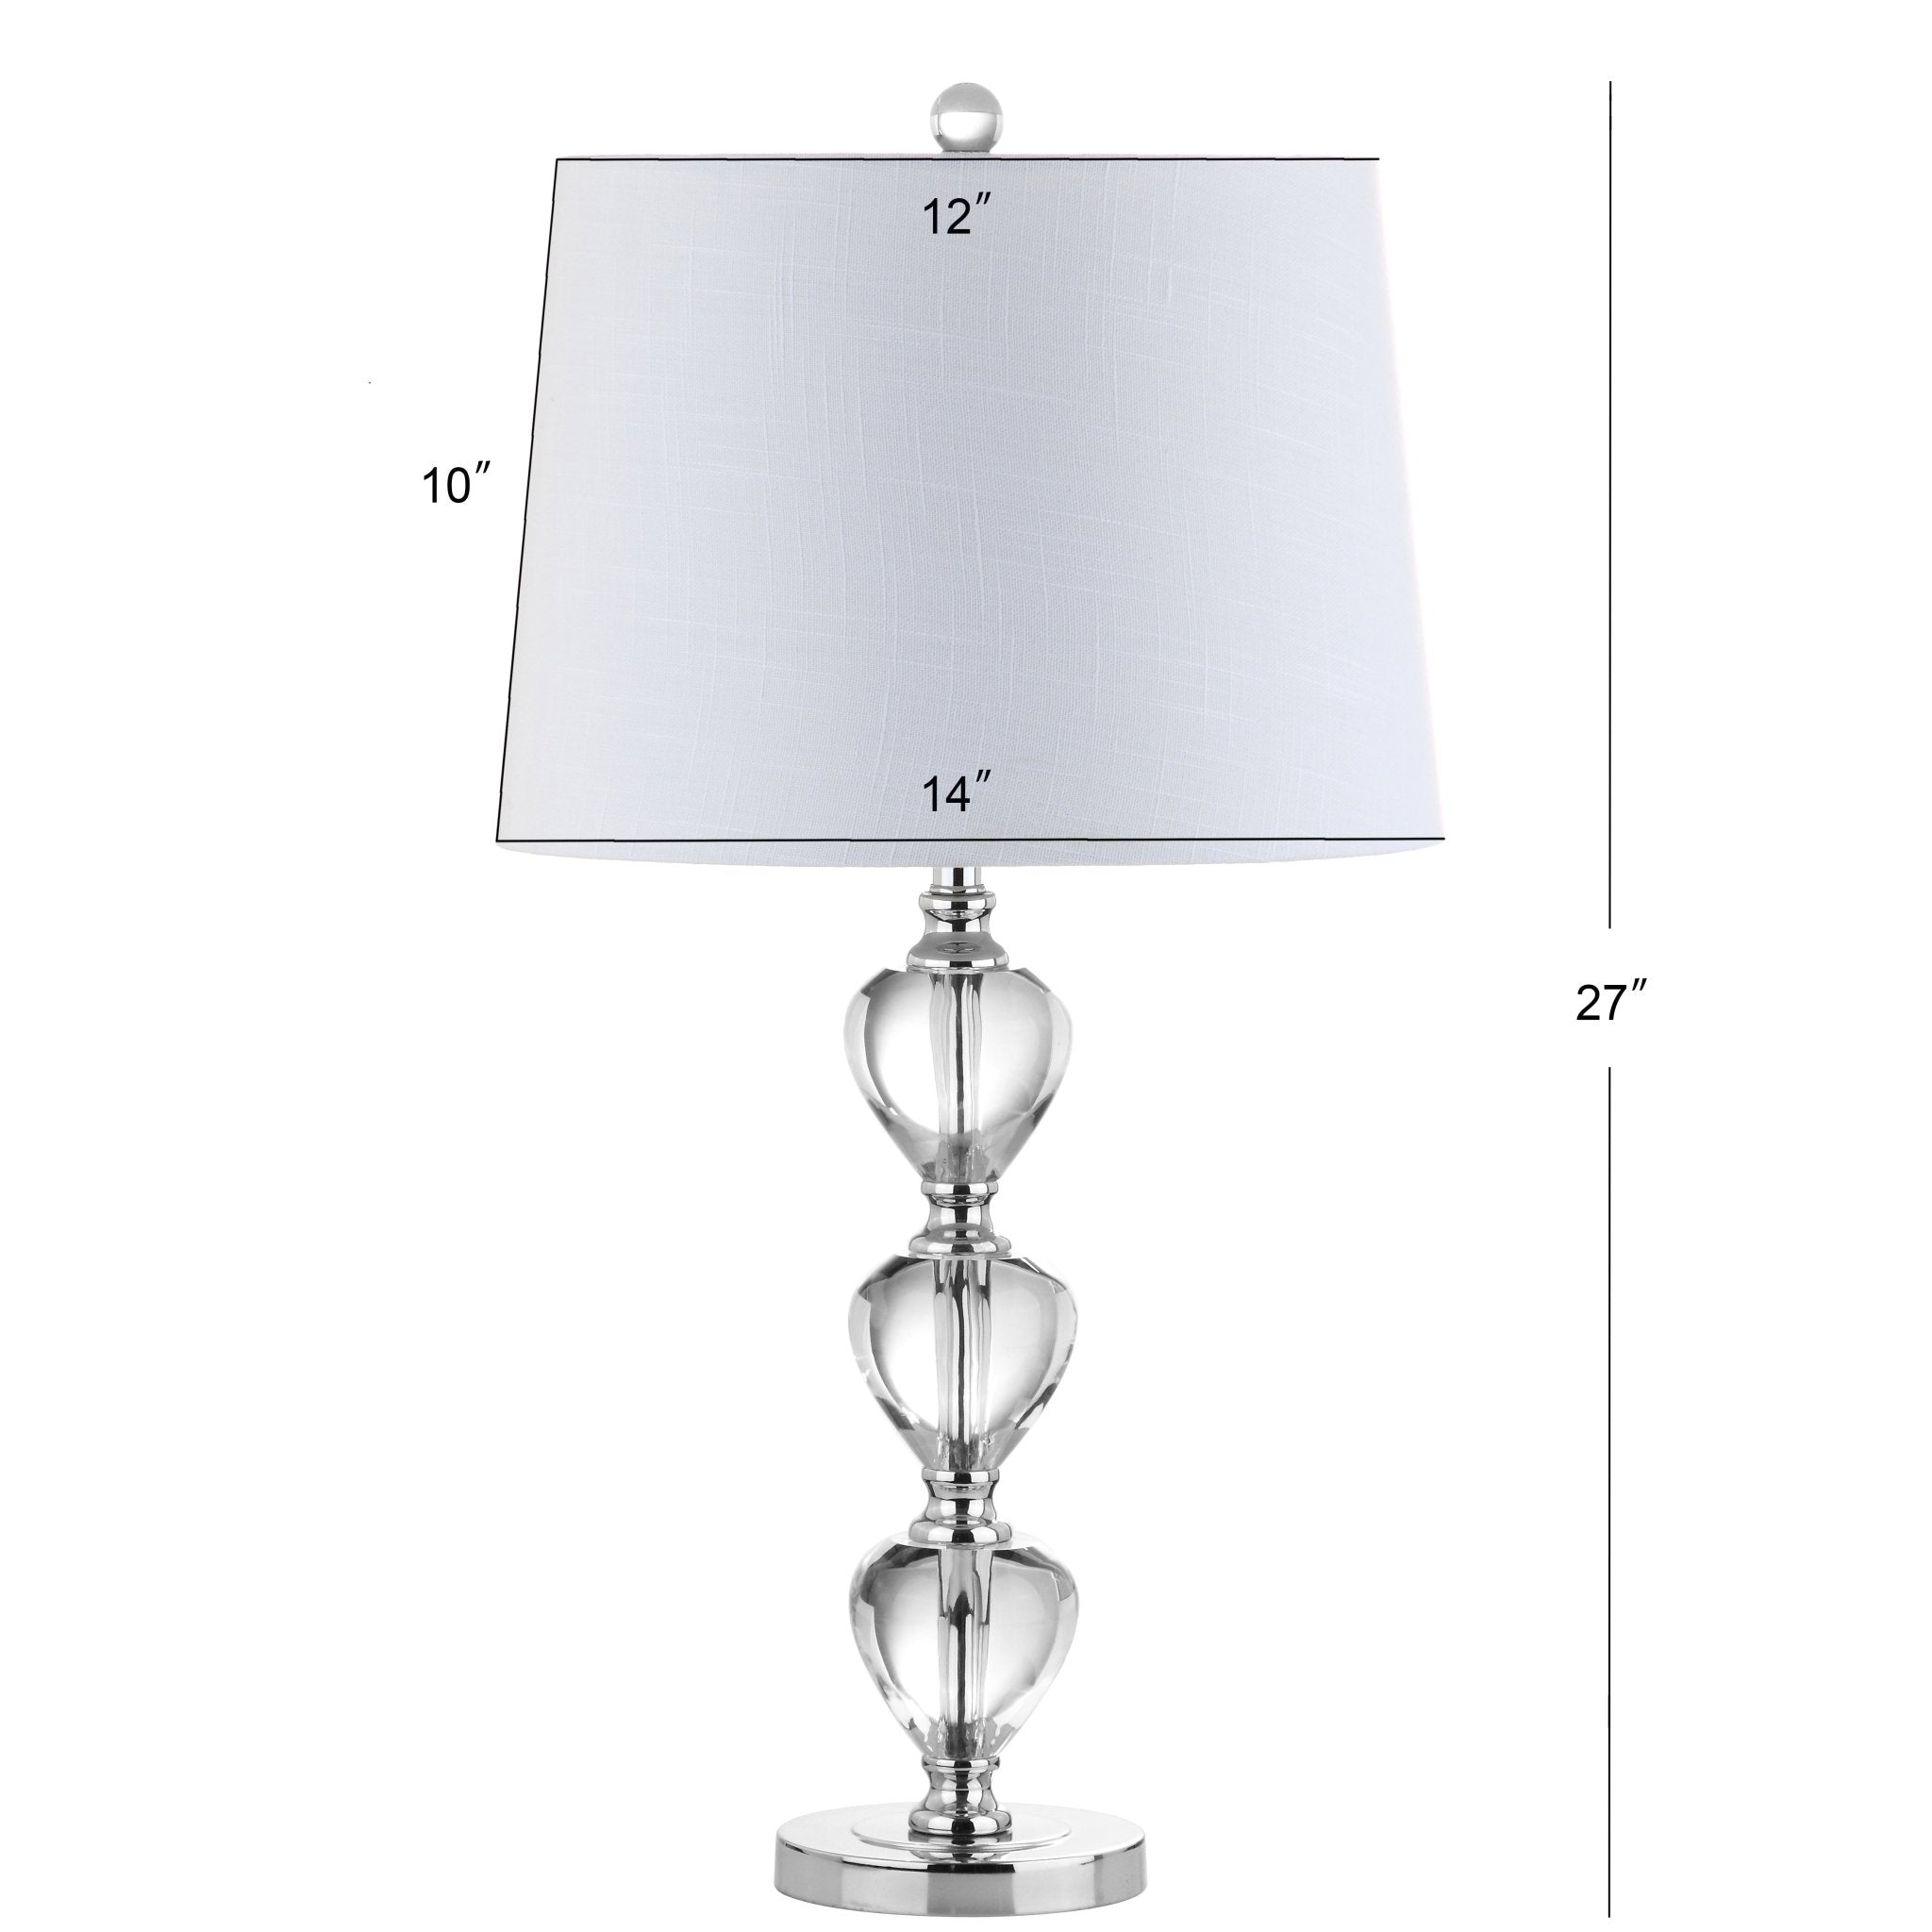 Cole Crystal LED Table Lamp - Pier 1